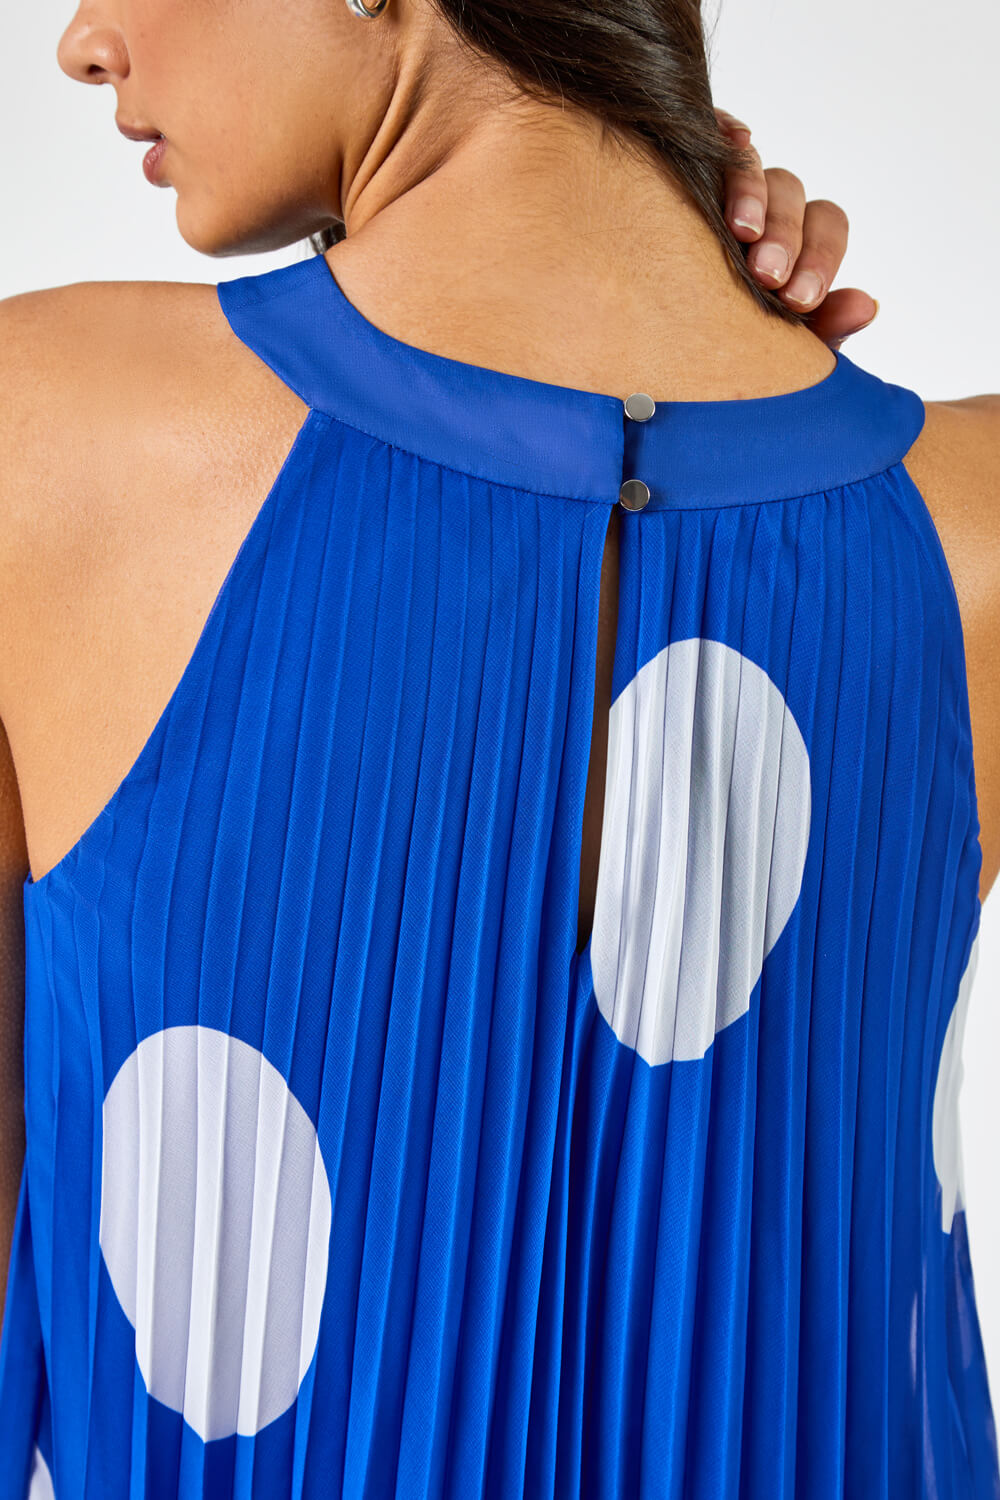 Royal Blue High Neck Spot Pleated Swing Dress, Image 5 of 5